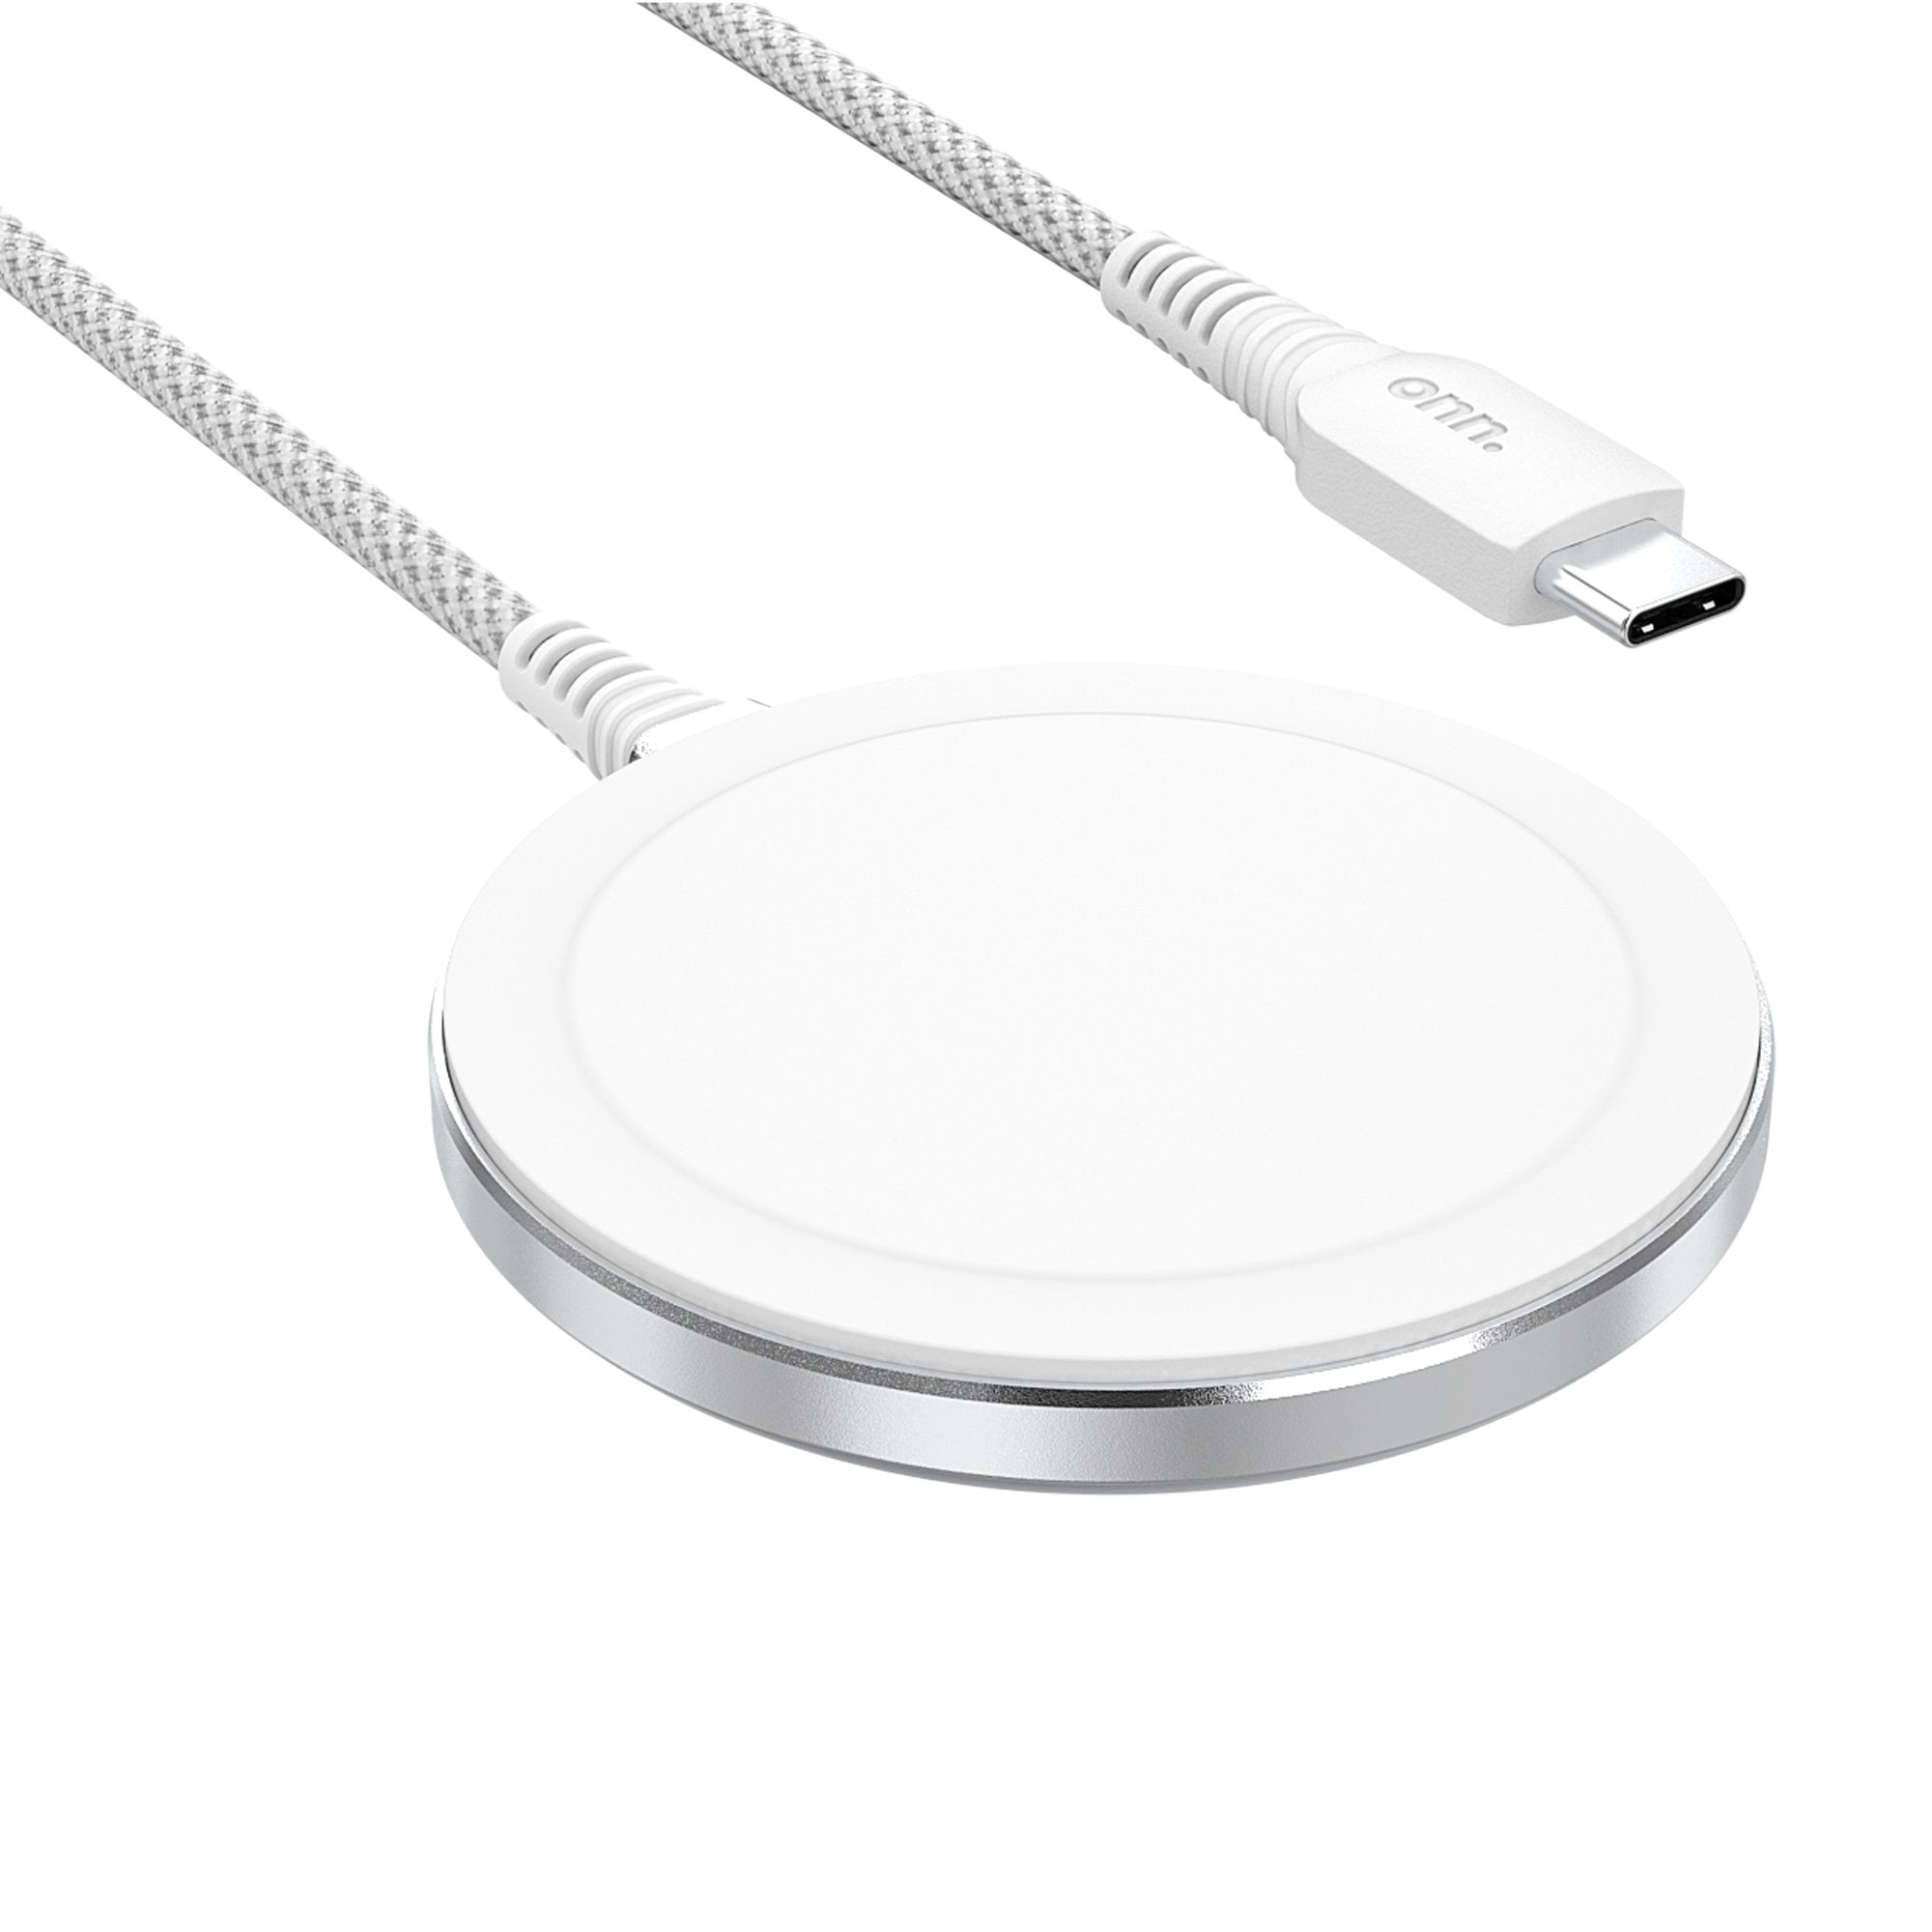 Restored WIAWHT100071183 MagSafe Charger, 6 ft. Braided USBC Cable For iPhone Pro Max, 13/13 12 Pro Max (Refurbished) -